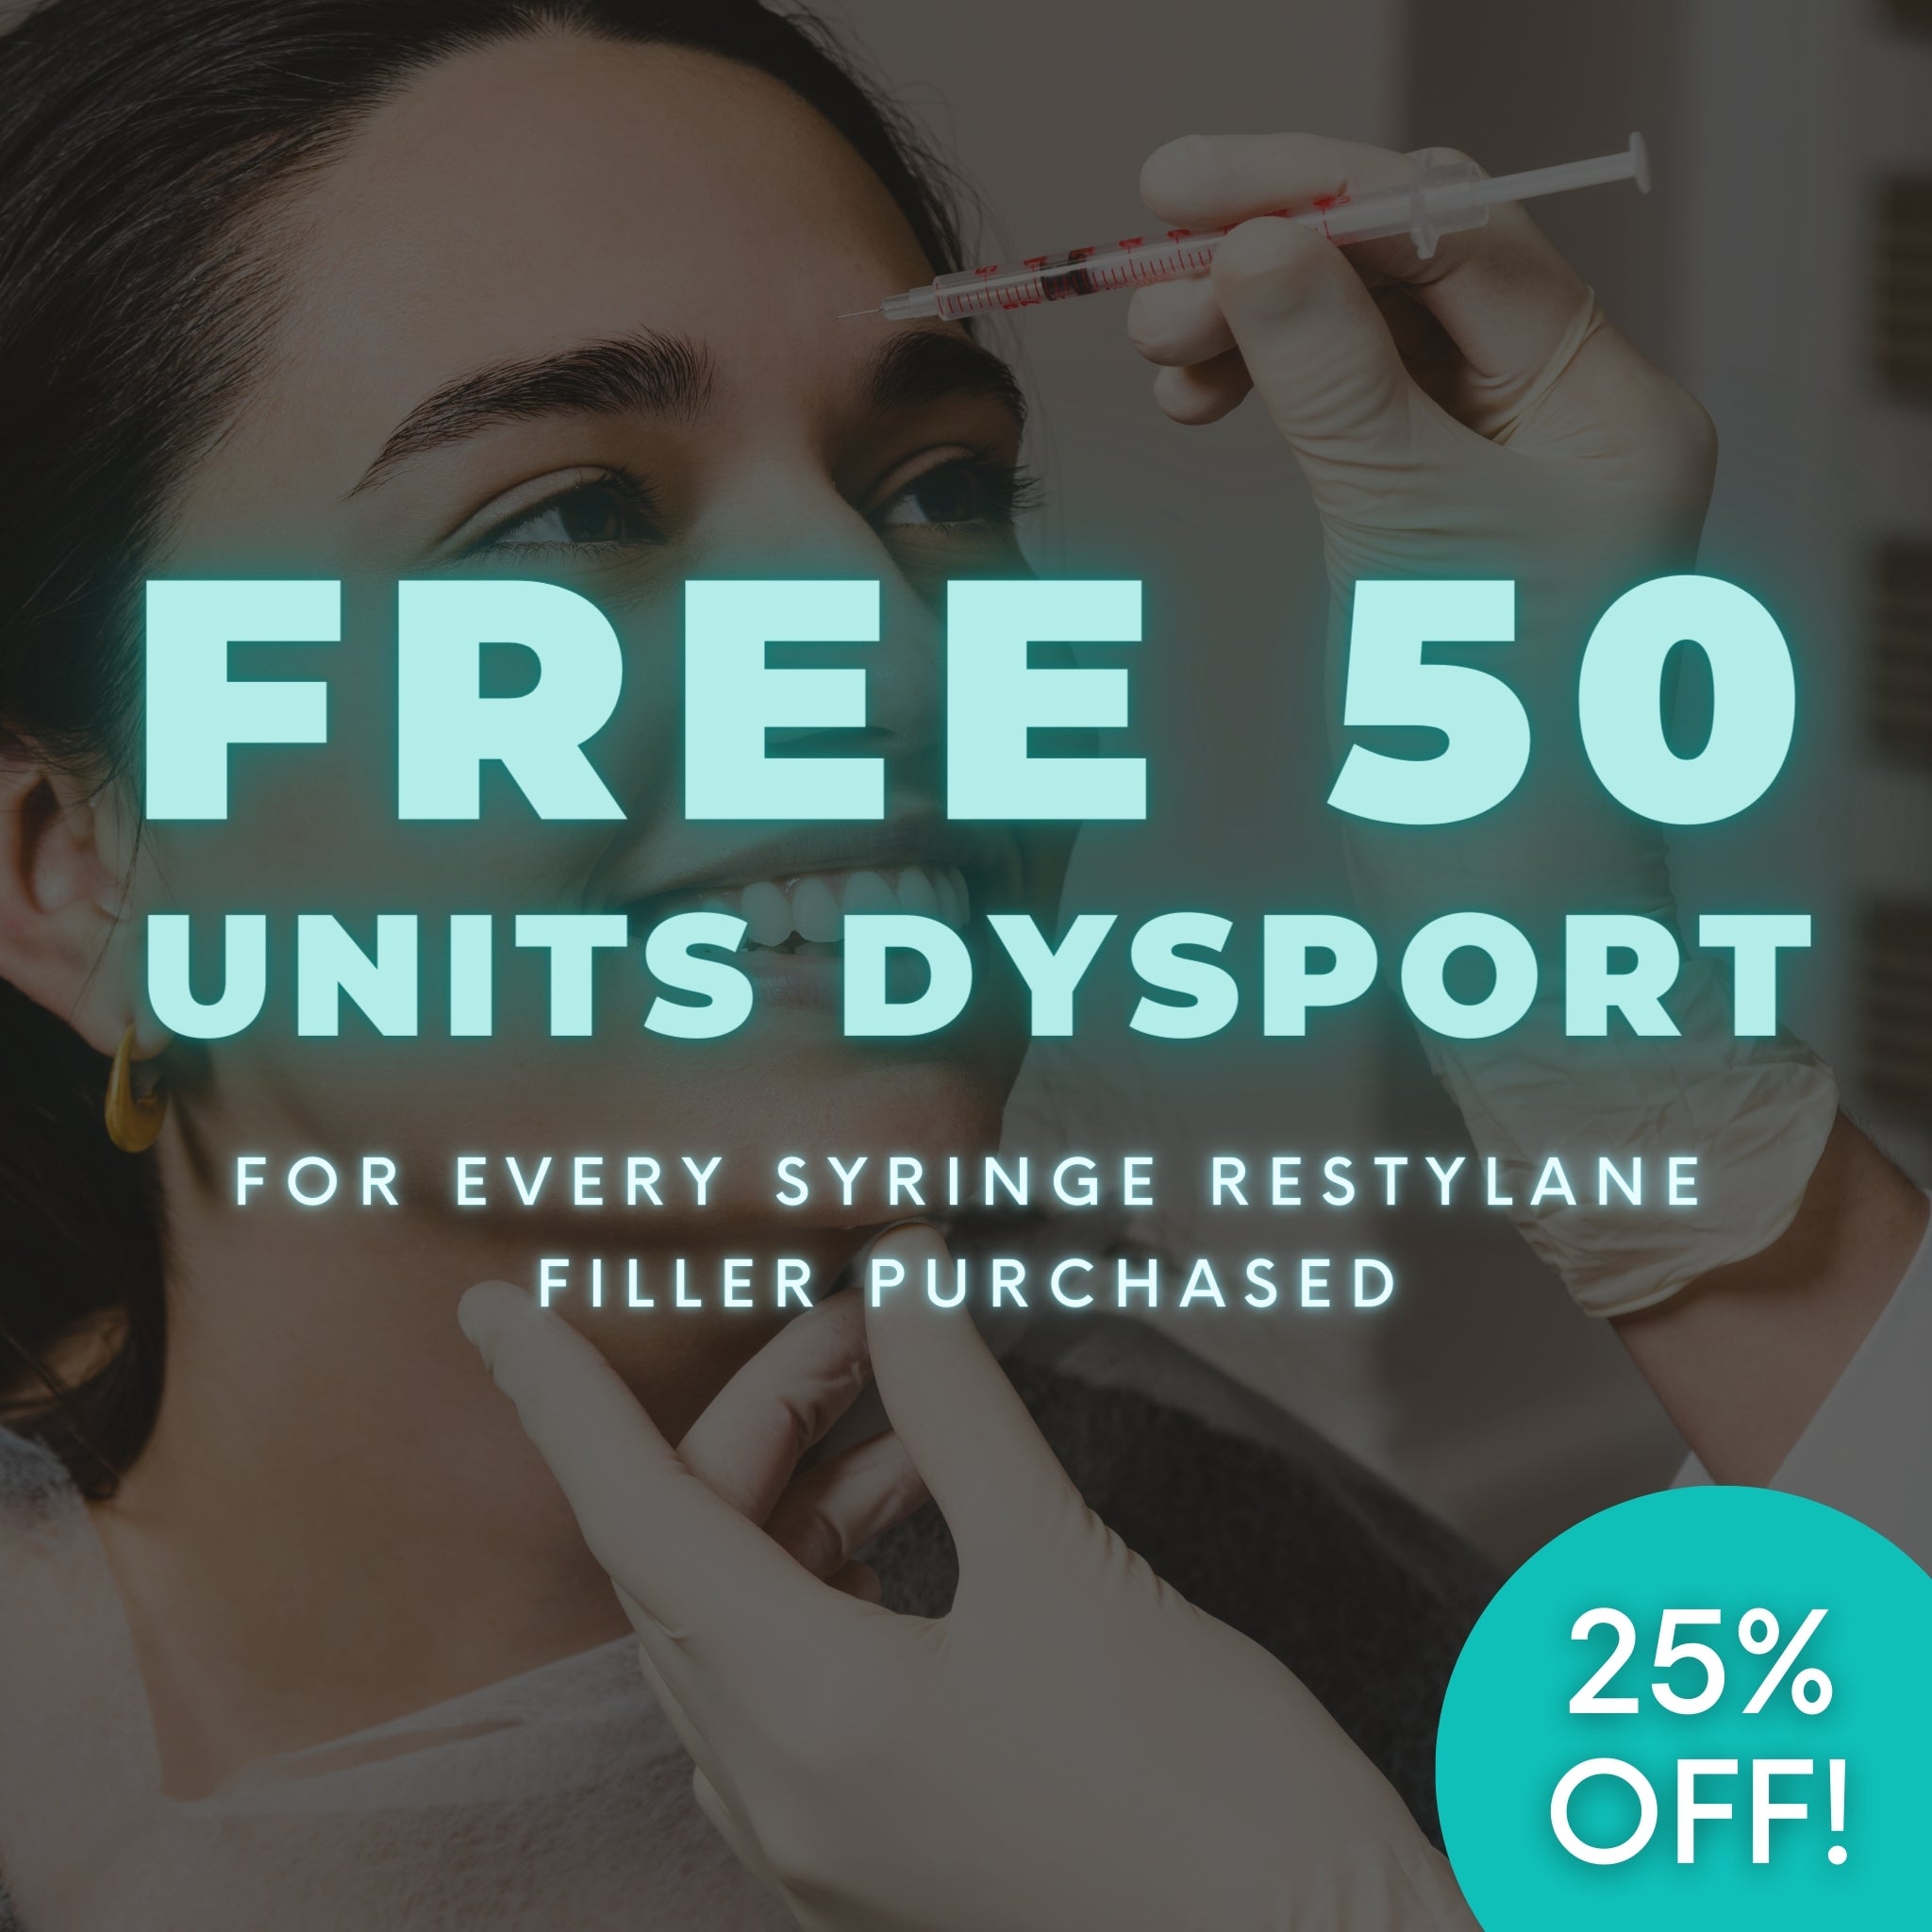 Free 50 Units of Dysport with Every Syringe Restylane Filler Purchased